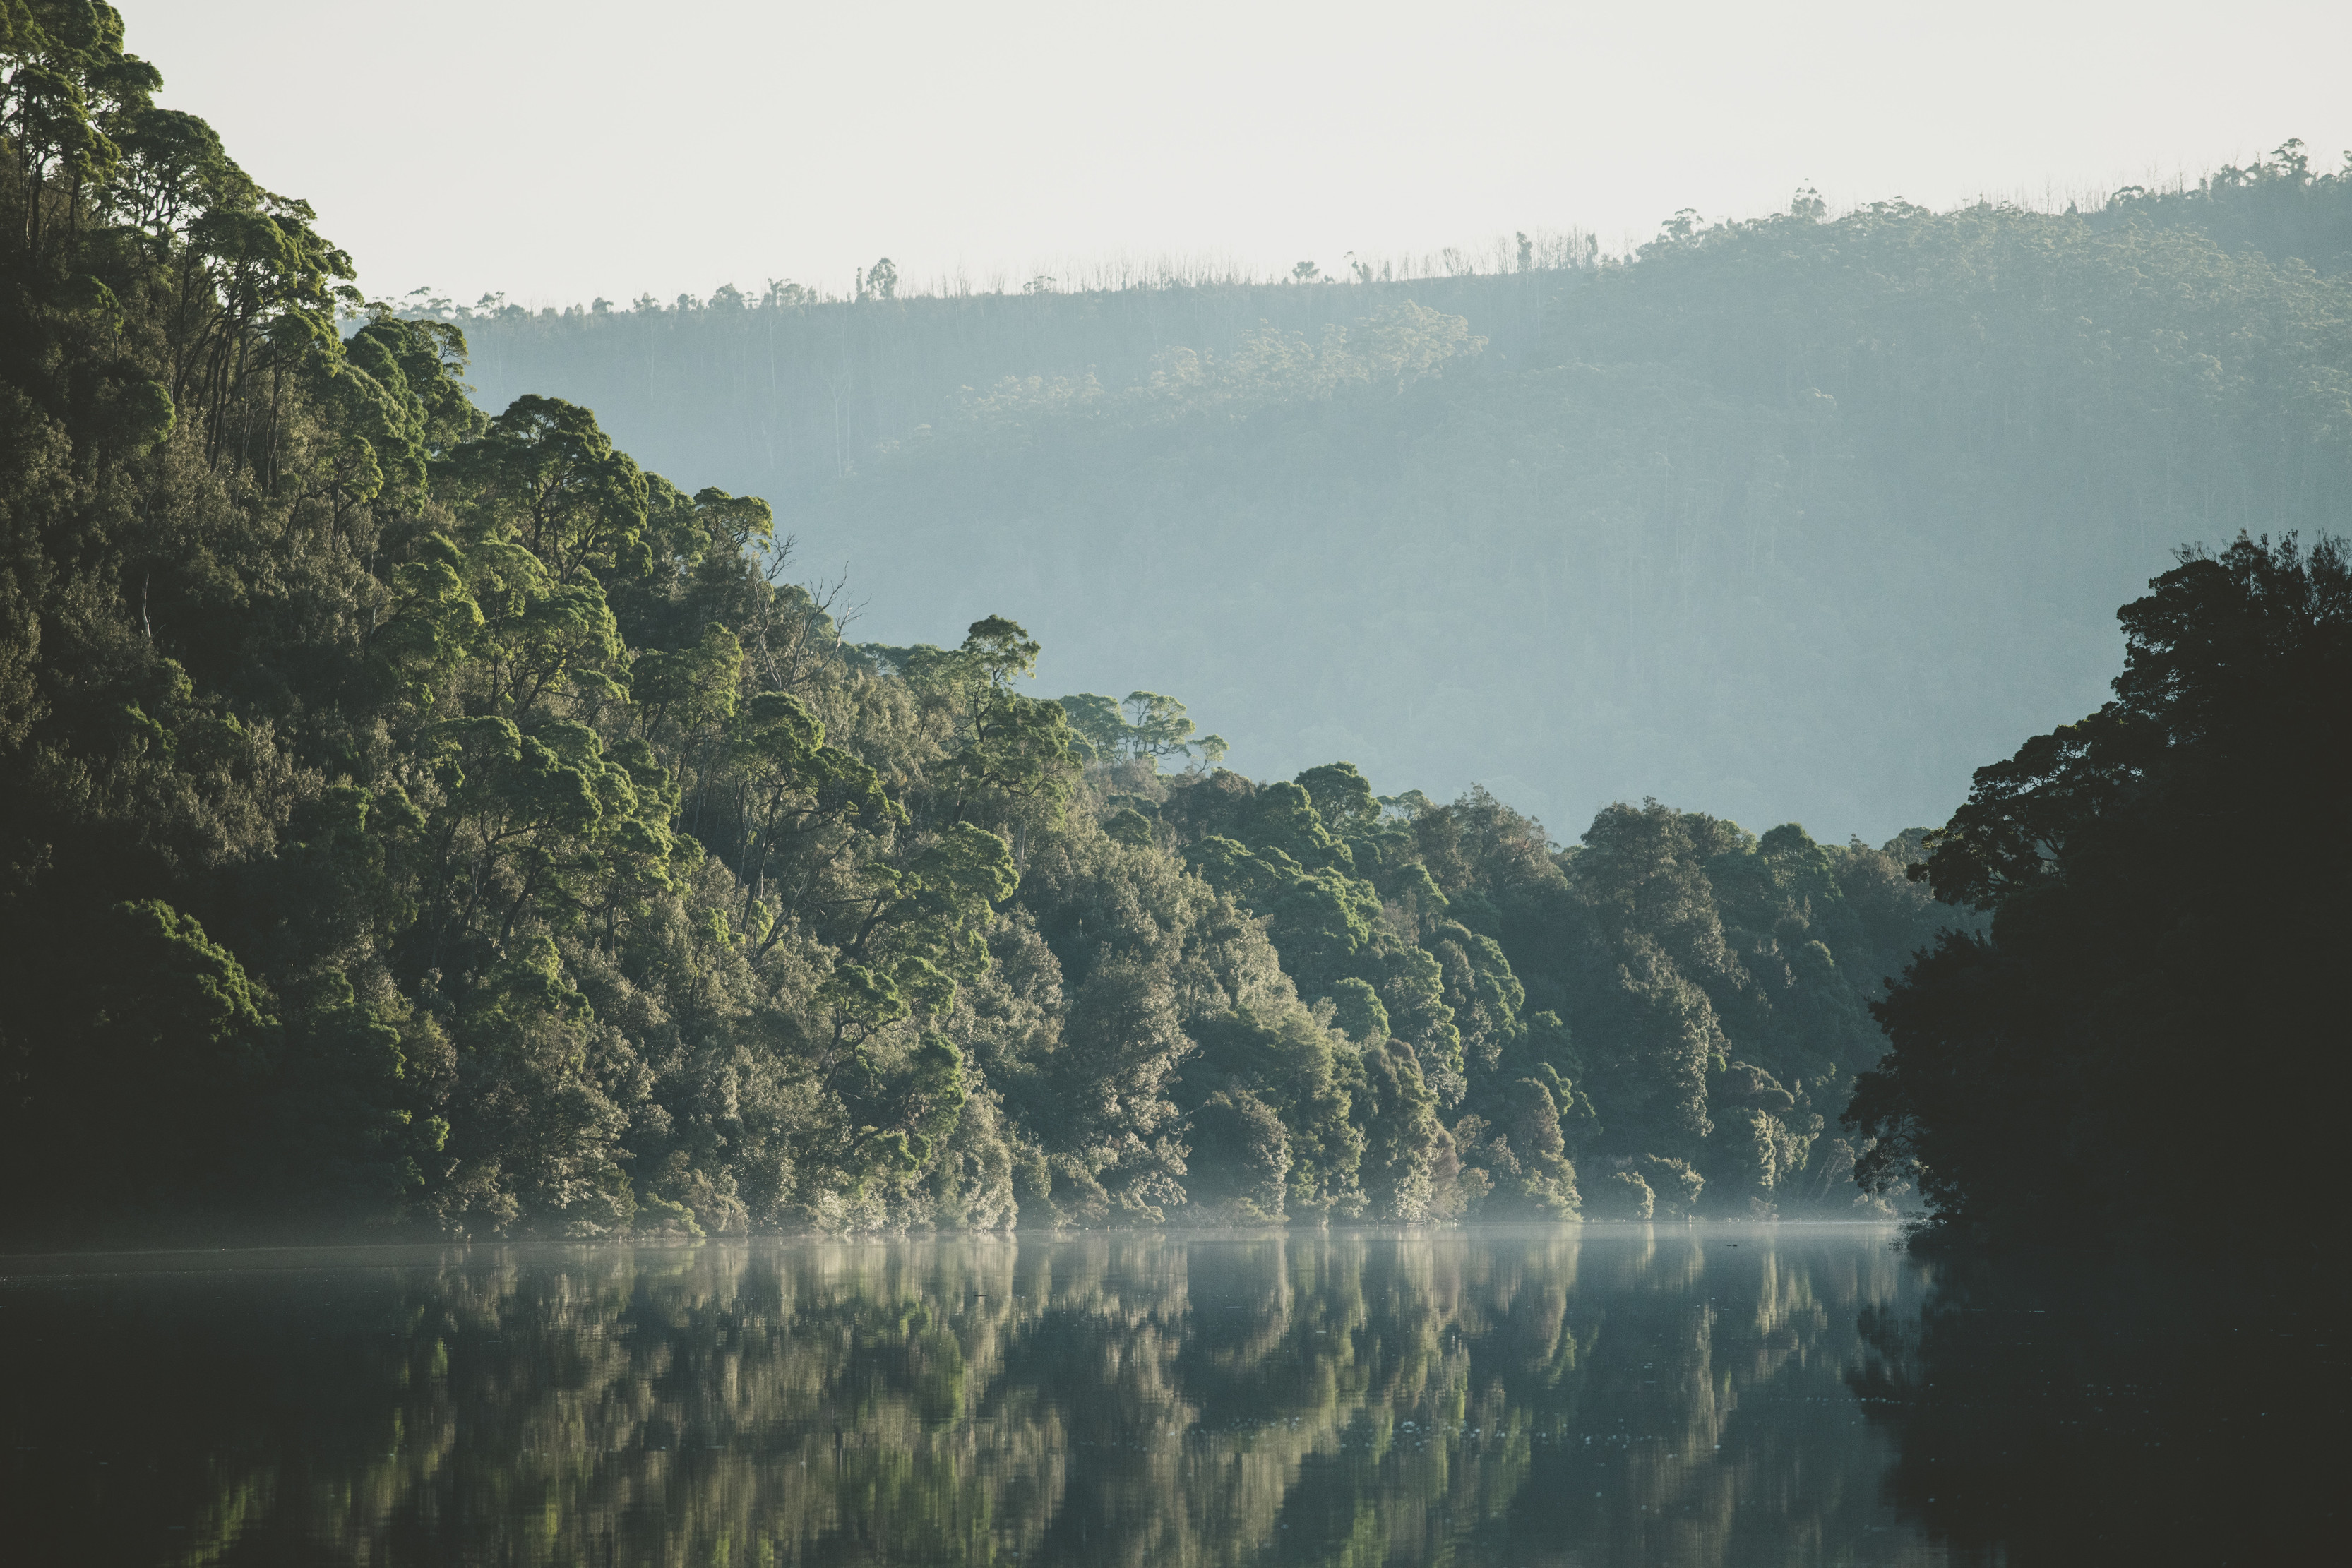 A moody and stunning image of Pieman River. Surrounded by dense rainforest.